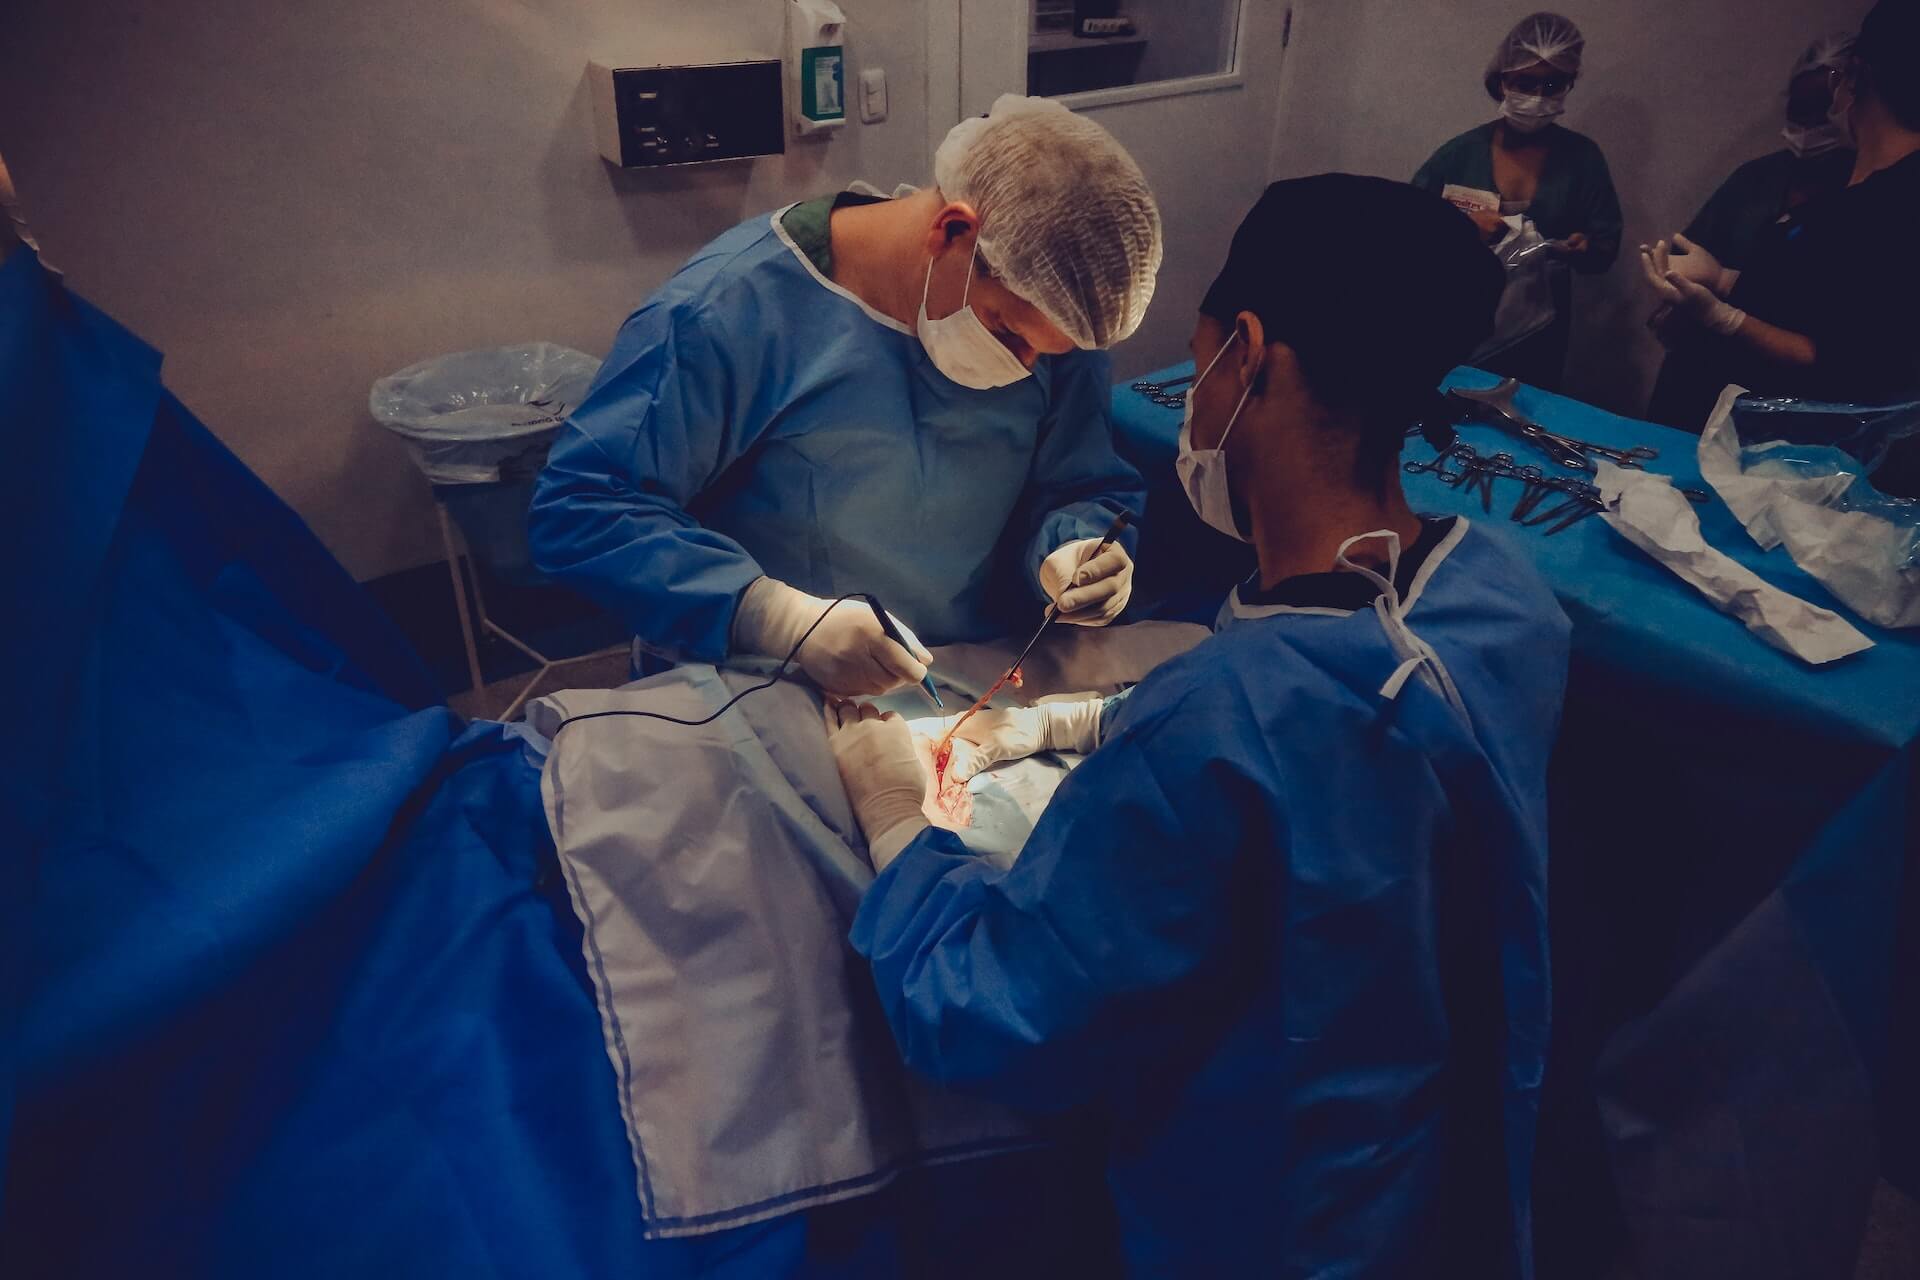 surgery being performed on a patient